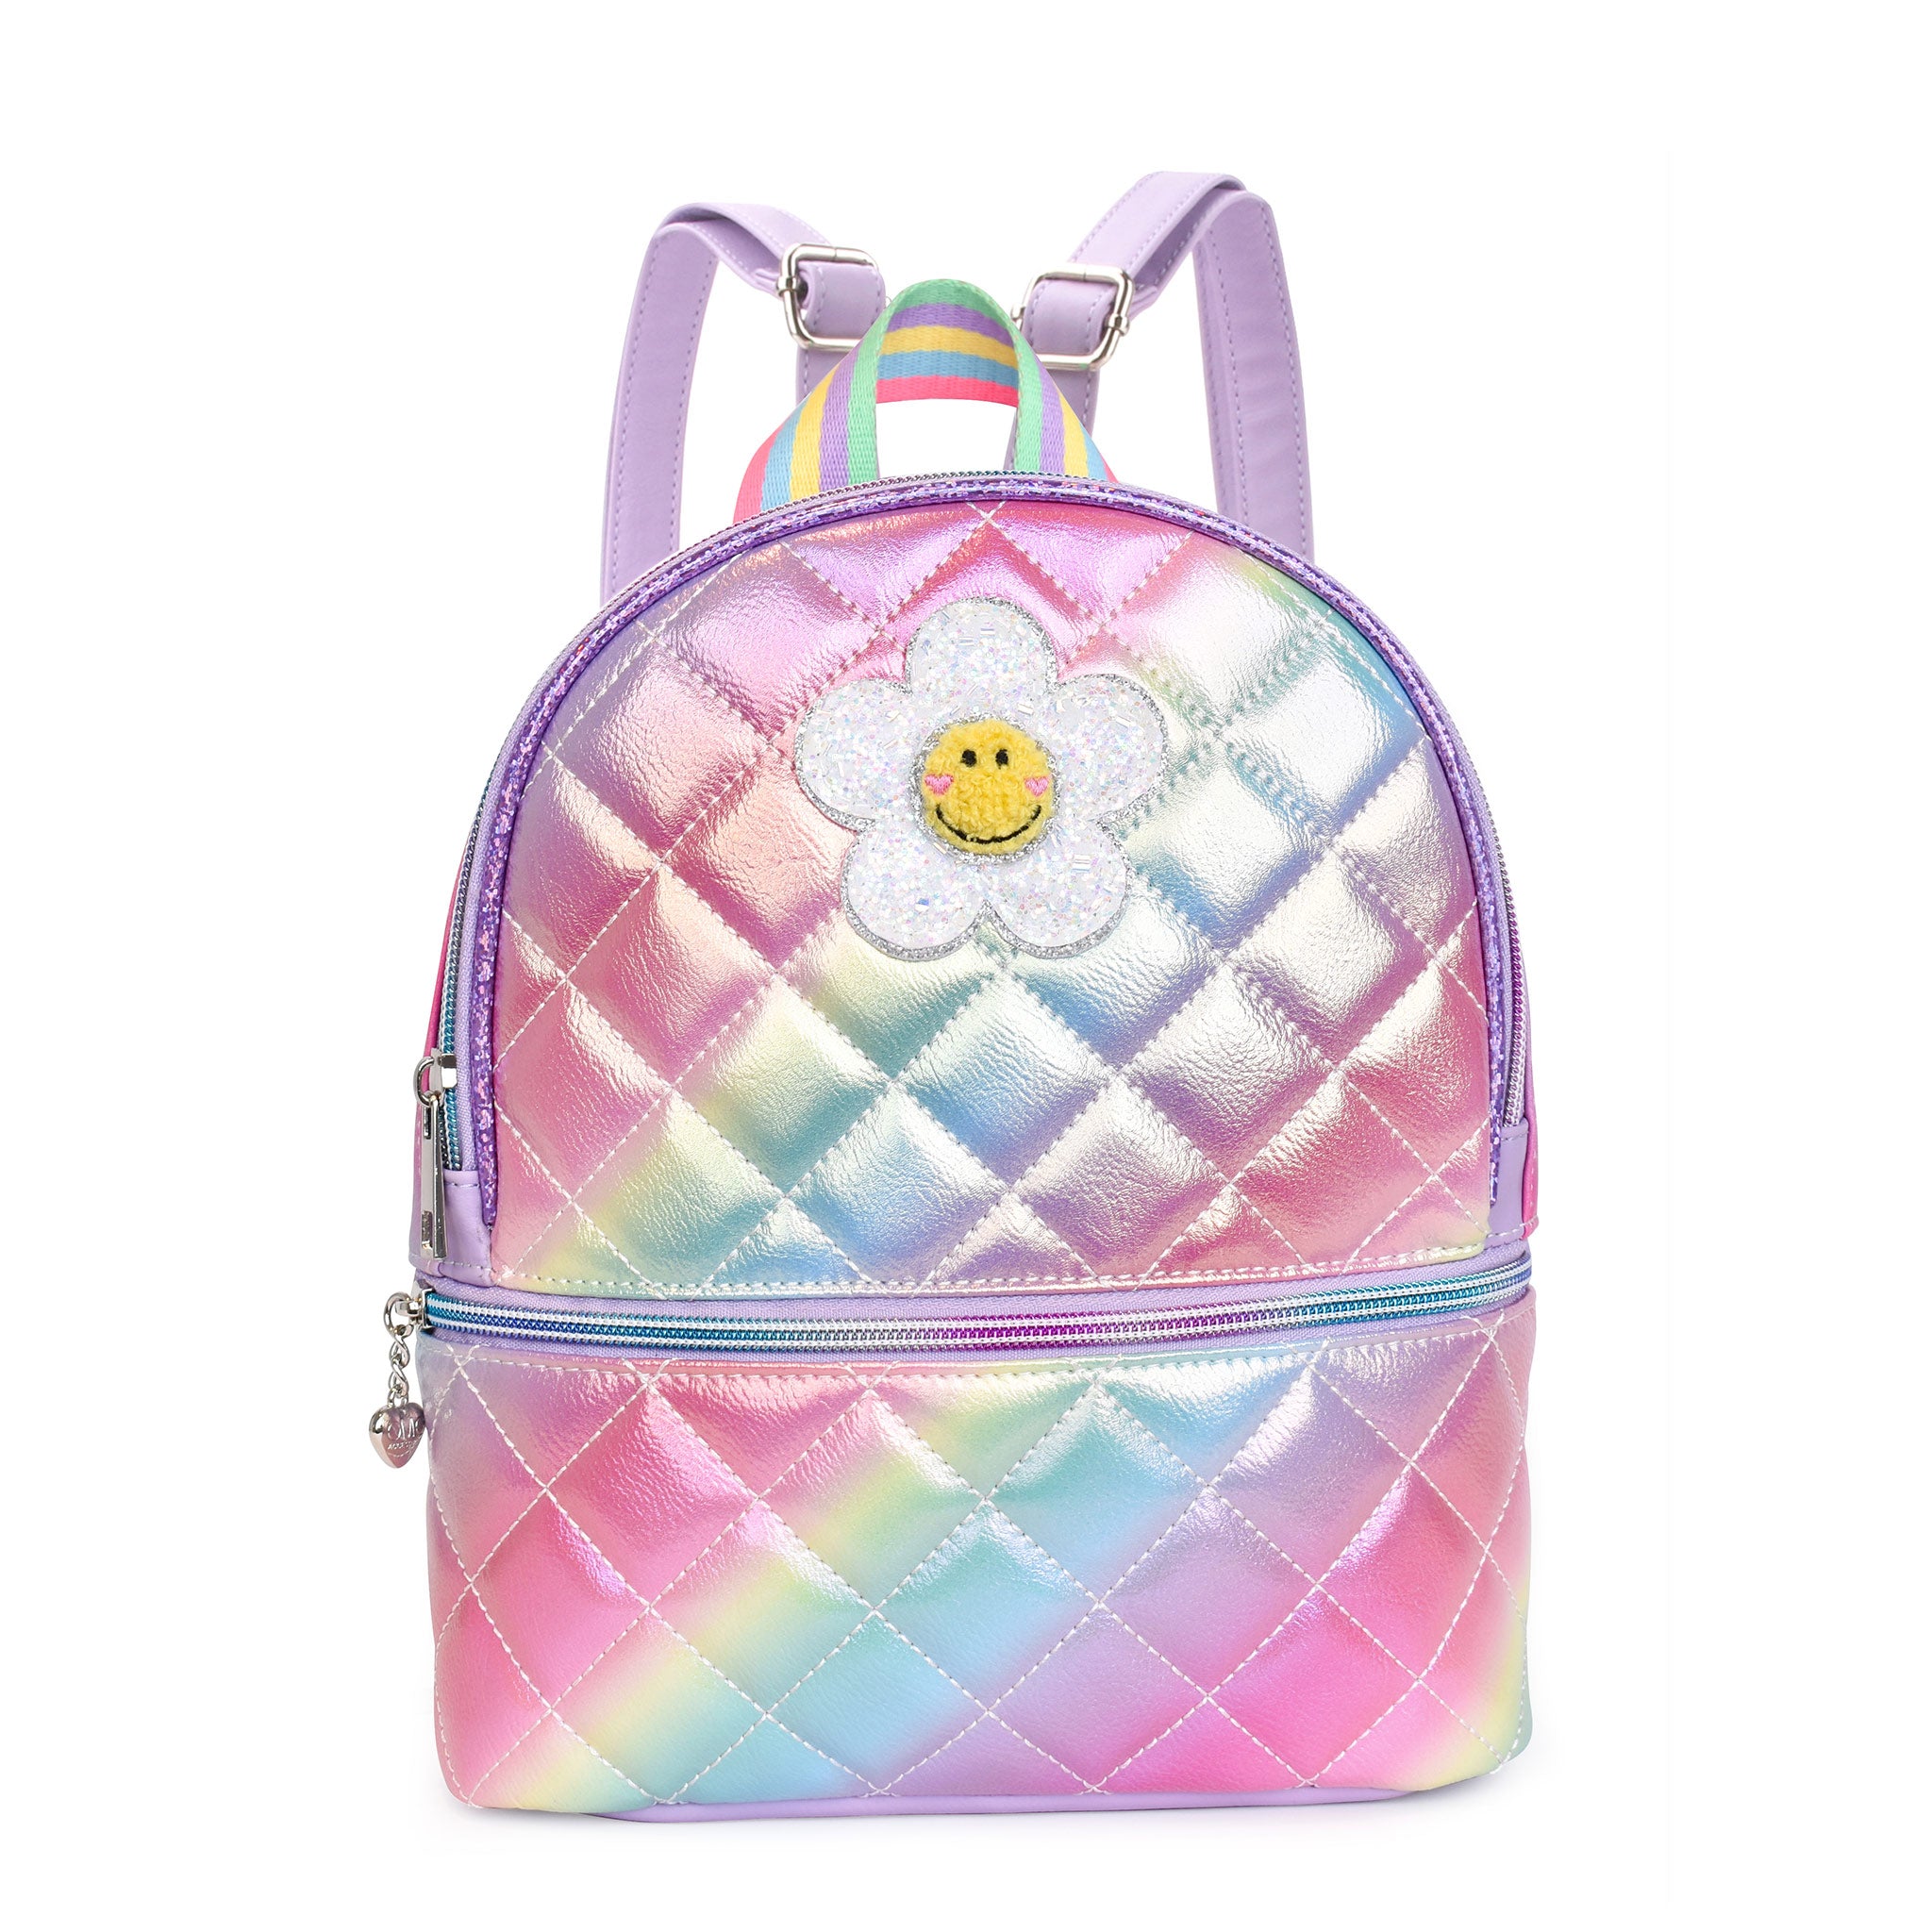 Front view of a rainbow ombre metallic quilted mini backpack with a glitter daisy appliqué 